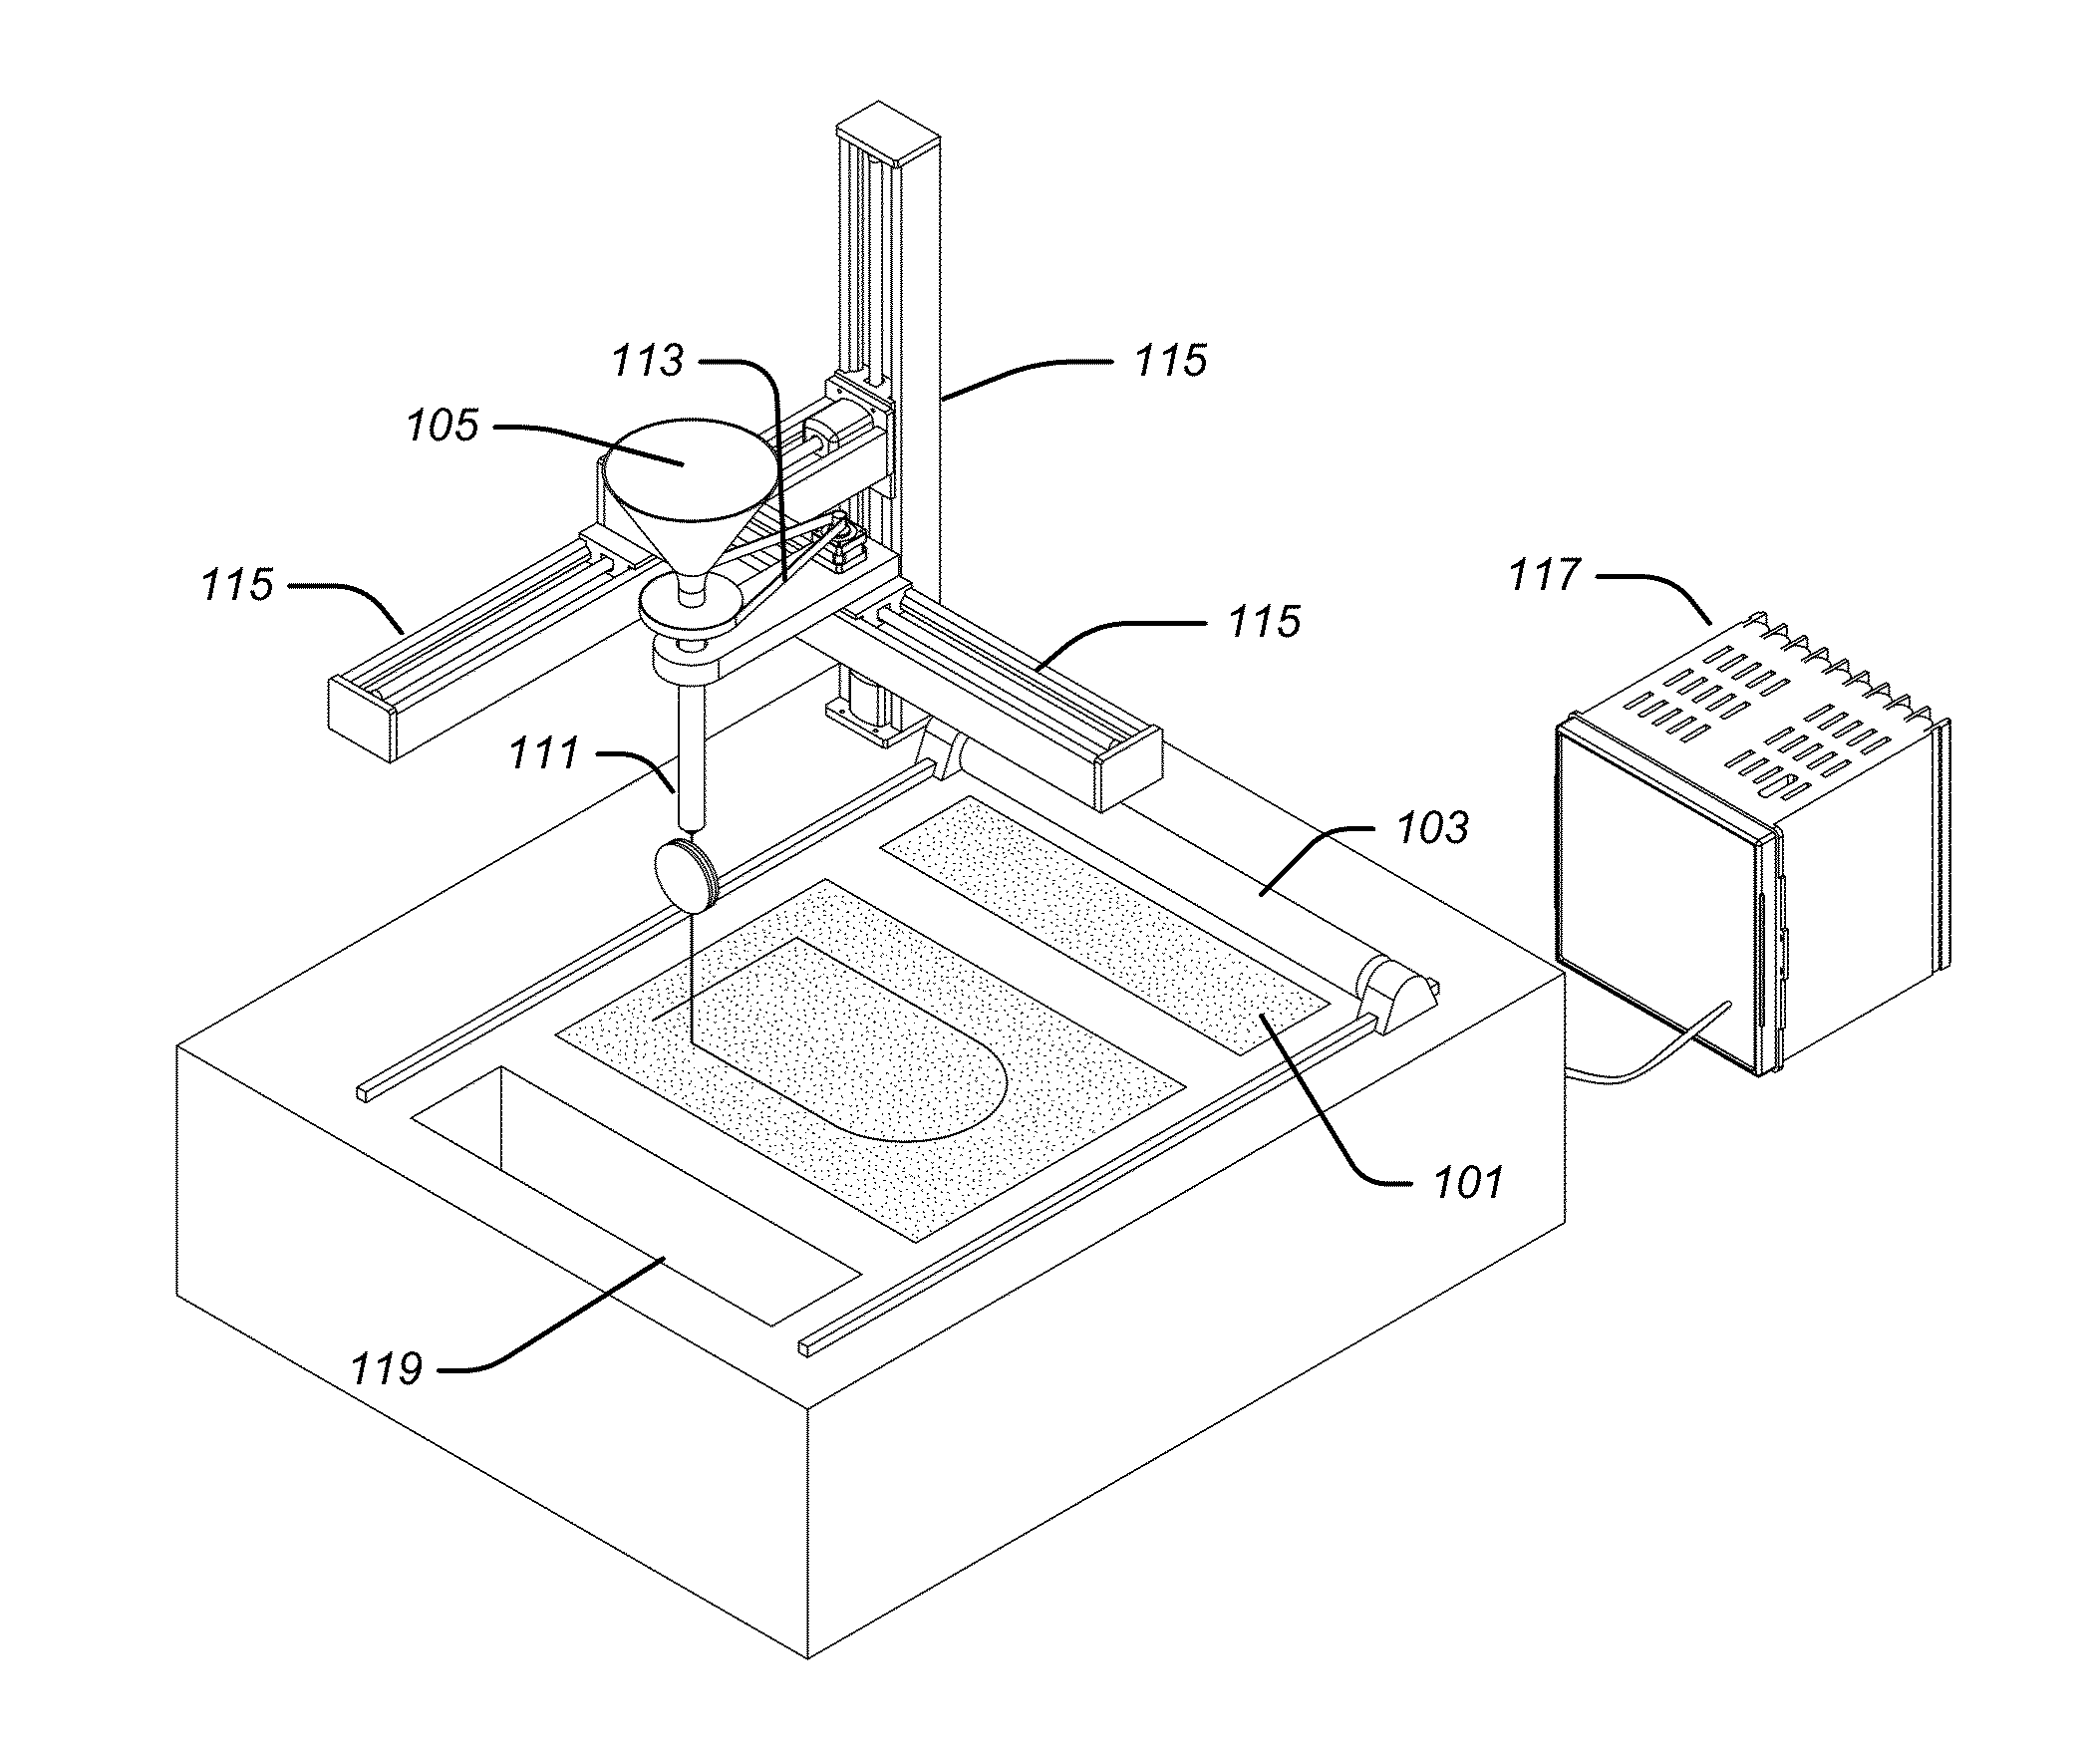 Inserting inhibitor to create part boundary isolation during 3D printing